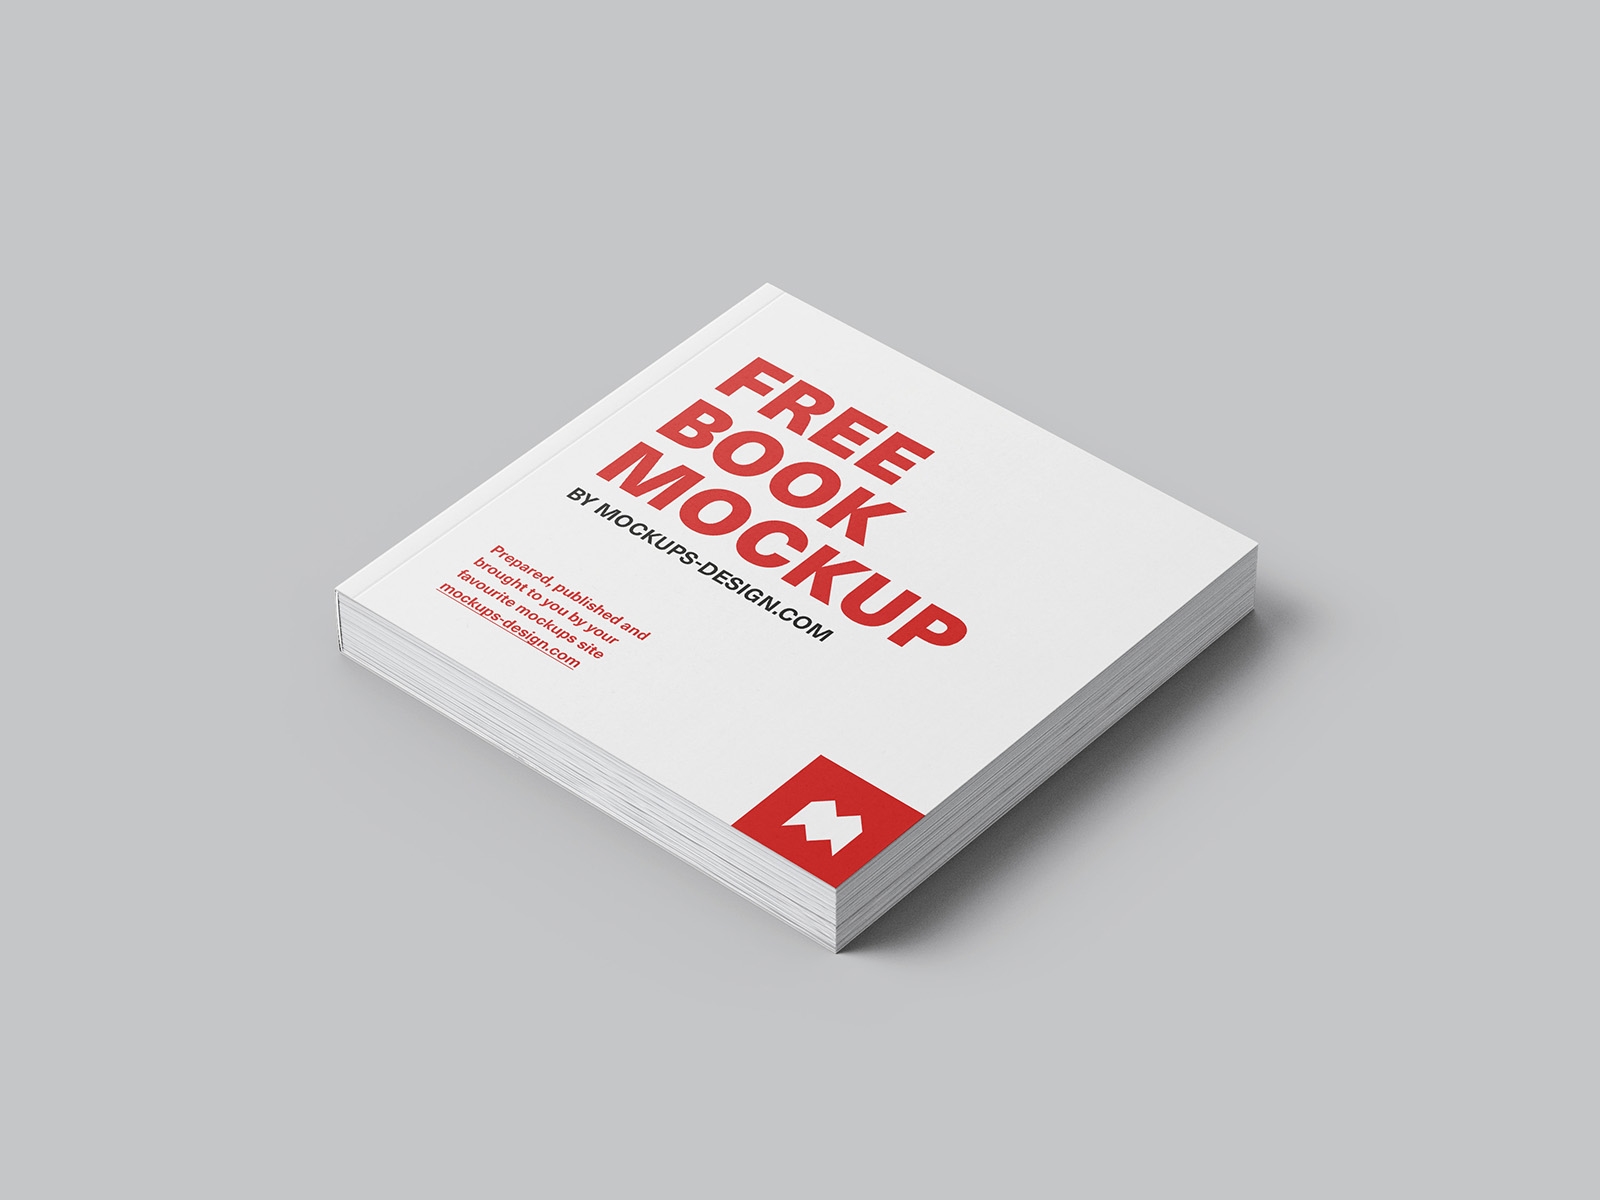 7 Square Book Mockups in Various Shots FREE PSD